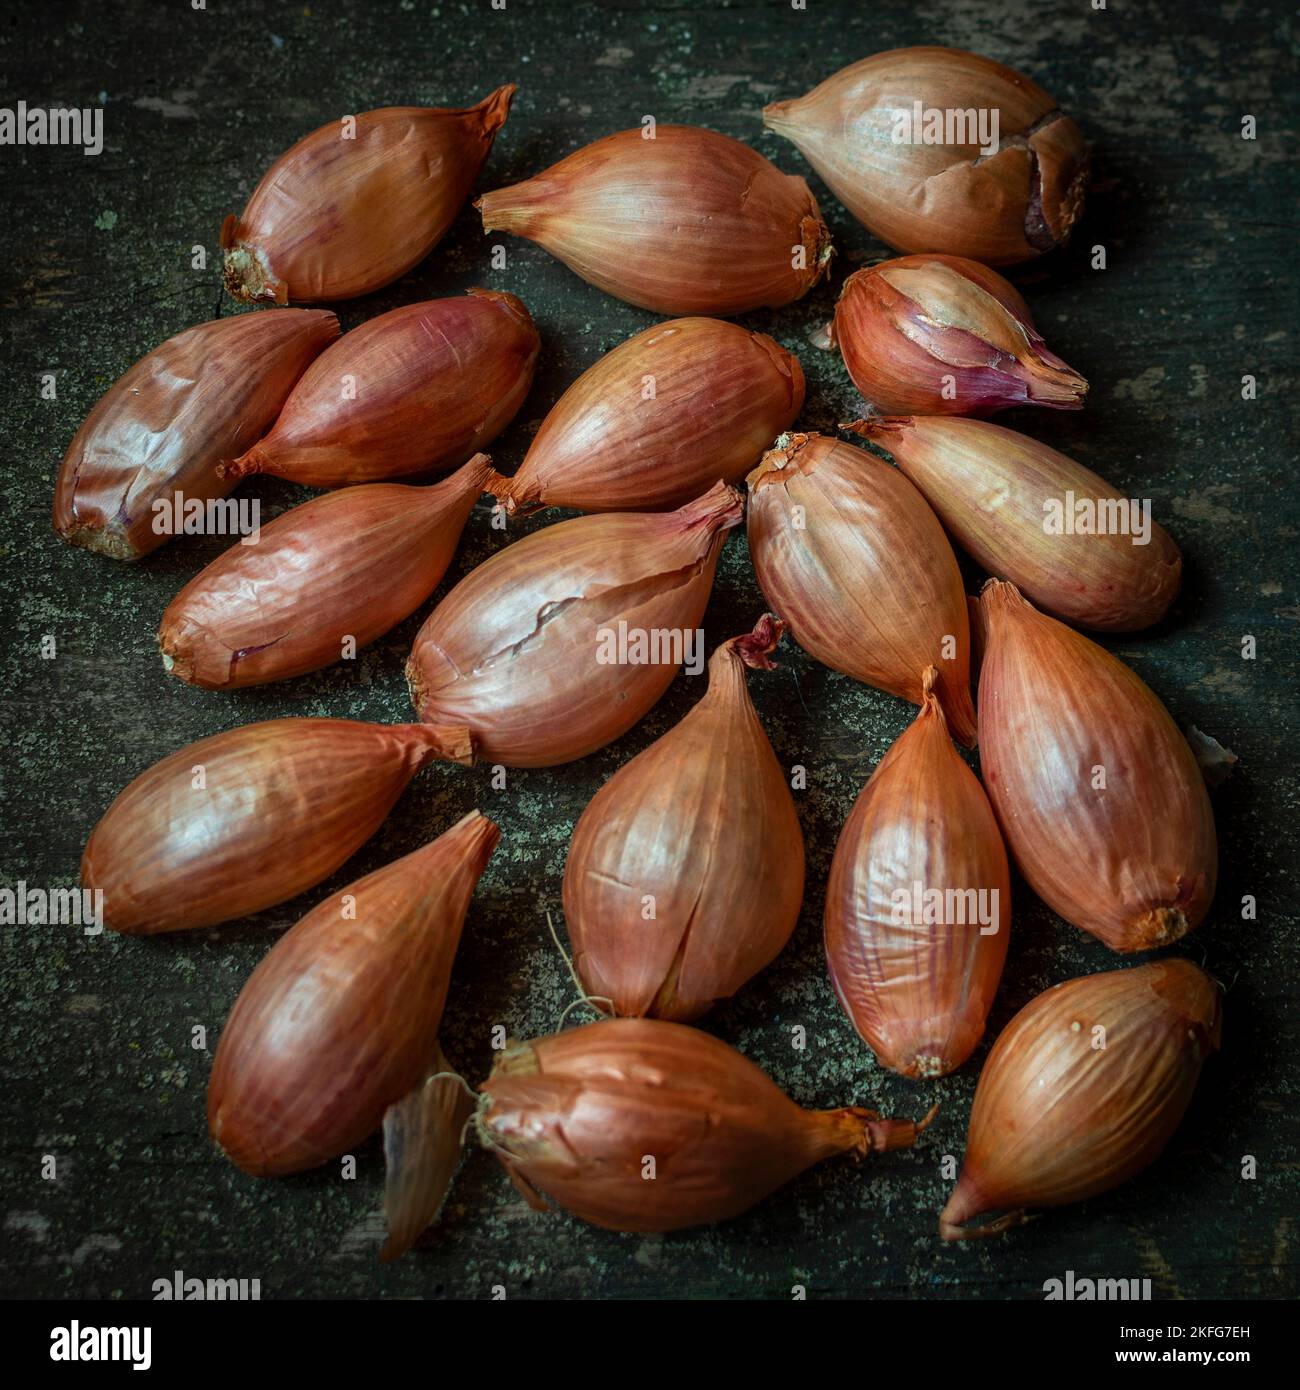 Closeup of long brown dry shallots on the ground Stock Photo